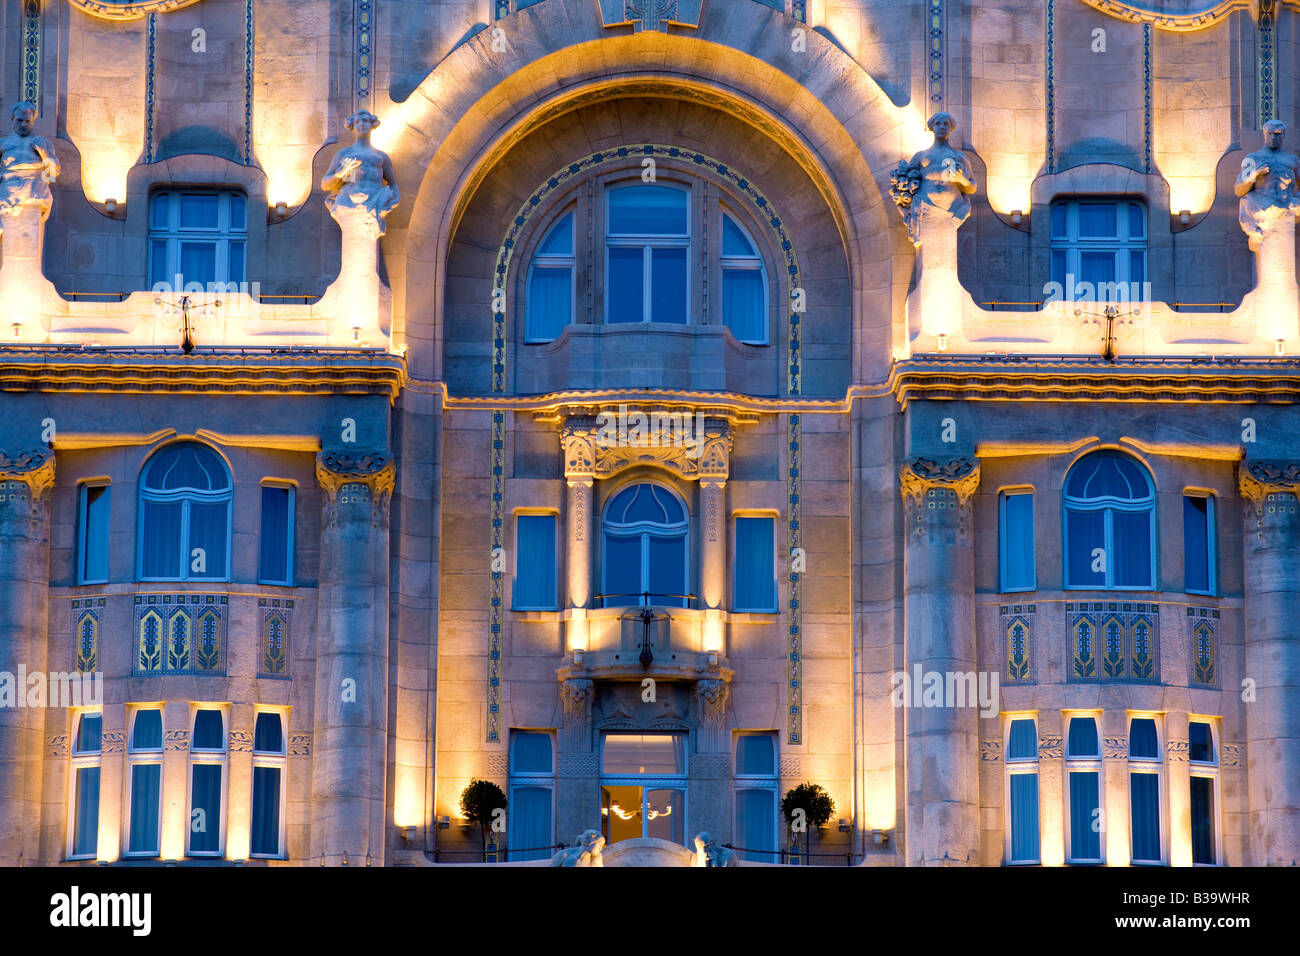 facade of the Gresham palace in Budapest Hungary Stock Photo